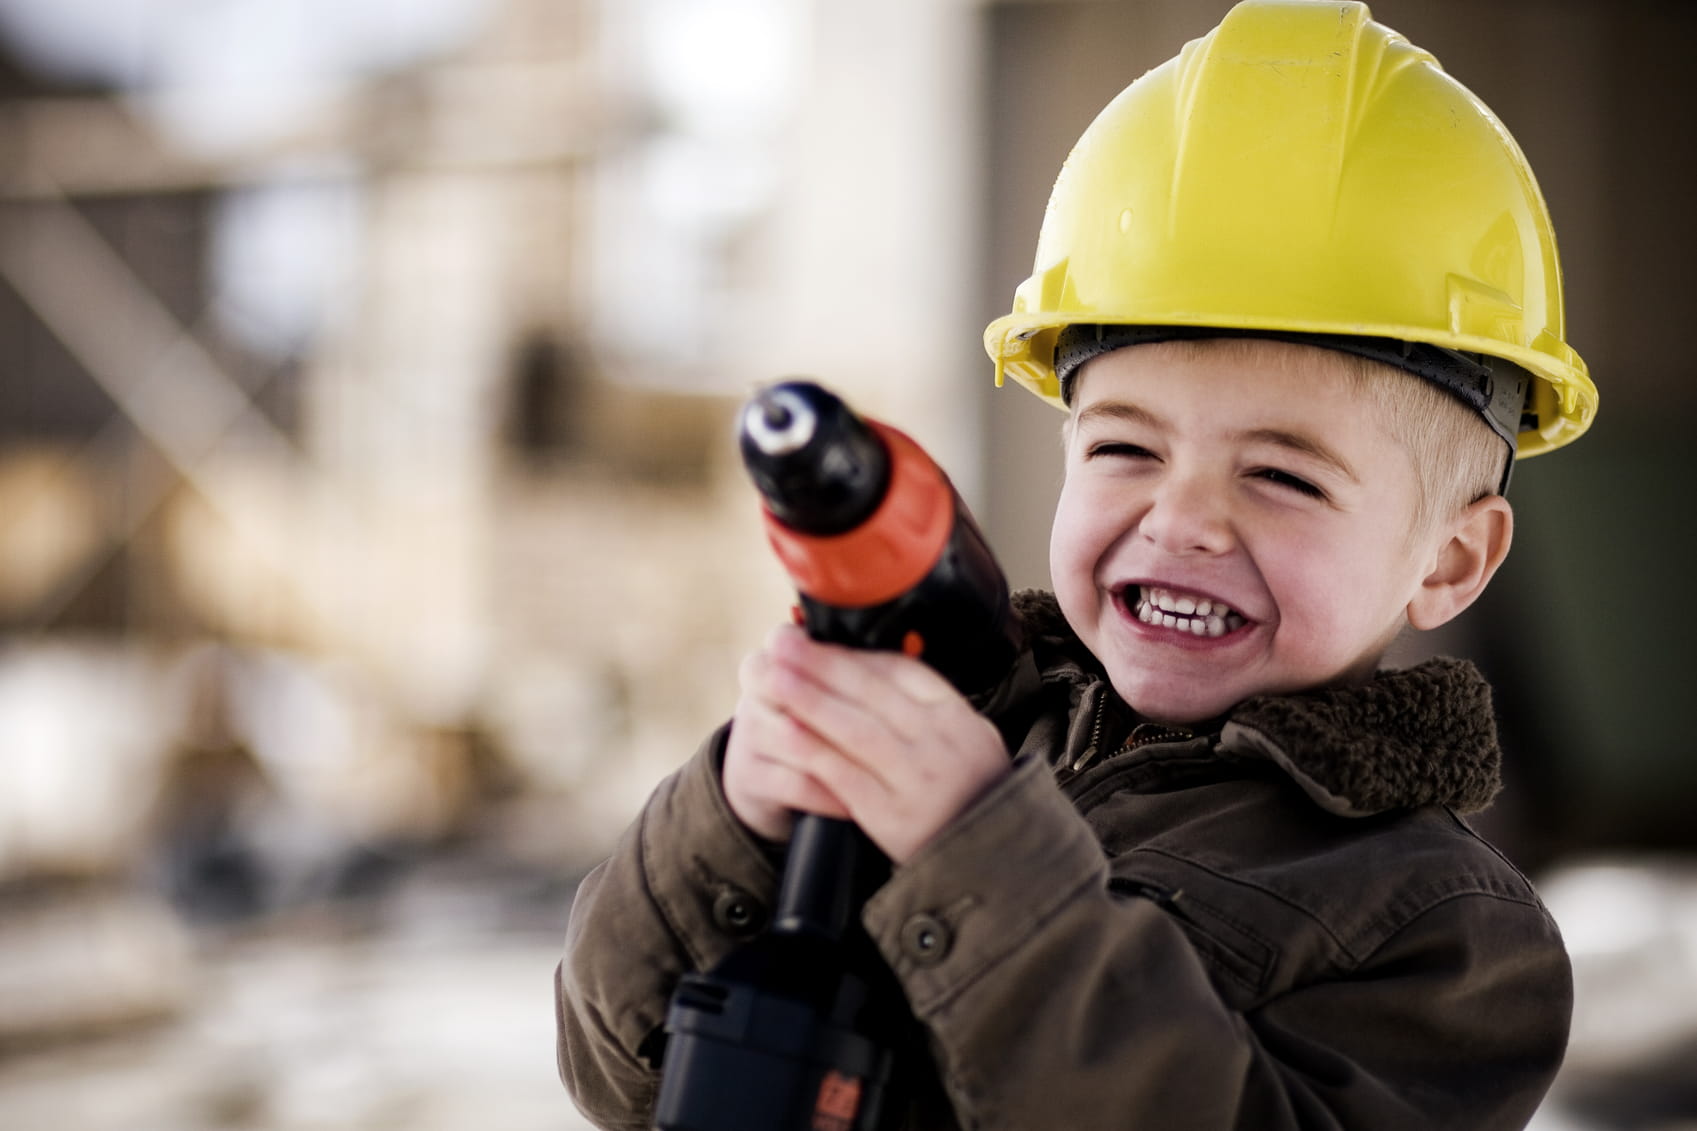 From cool yellow helmets to the bulldozer's beeps, construction sites are fantastic for building your child's understanding of the world. Photo by © Andrew Rich